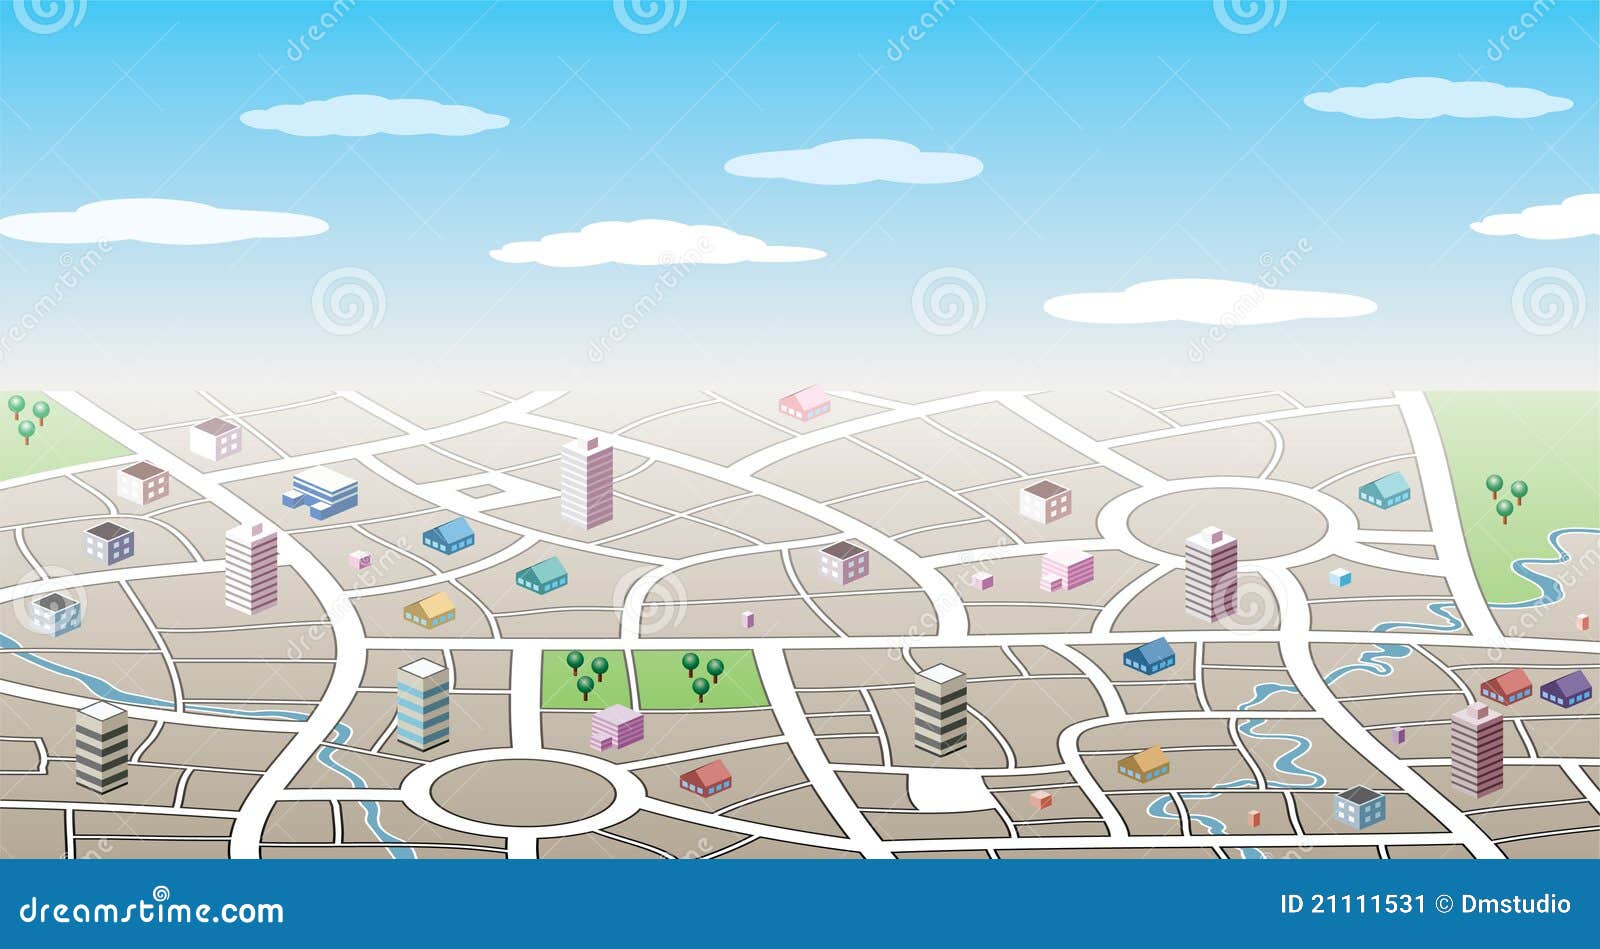 Download 3d city map stock vector. Illustration of building, grass - 21111531